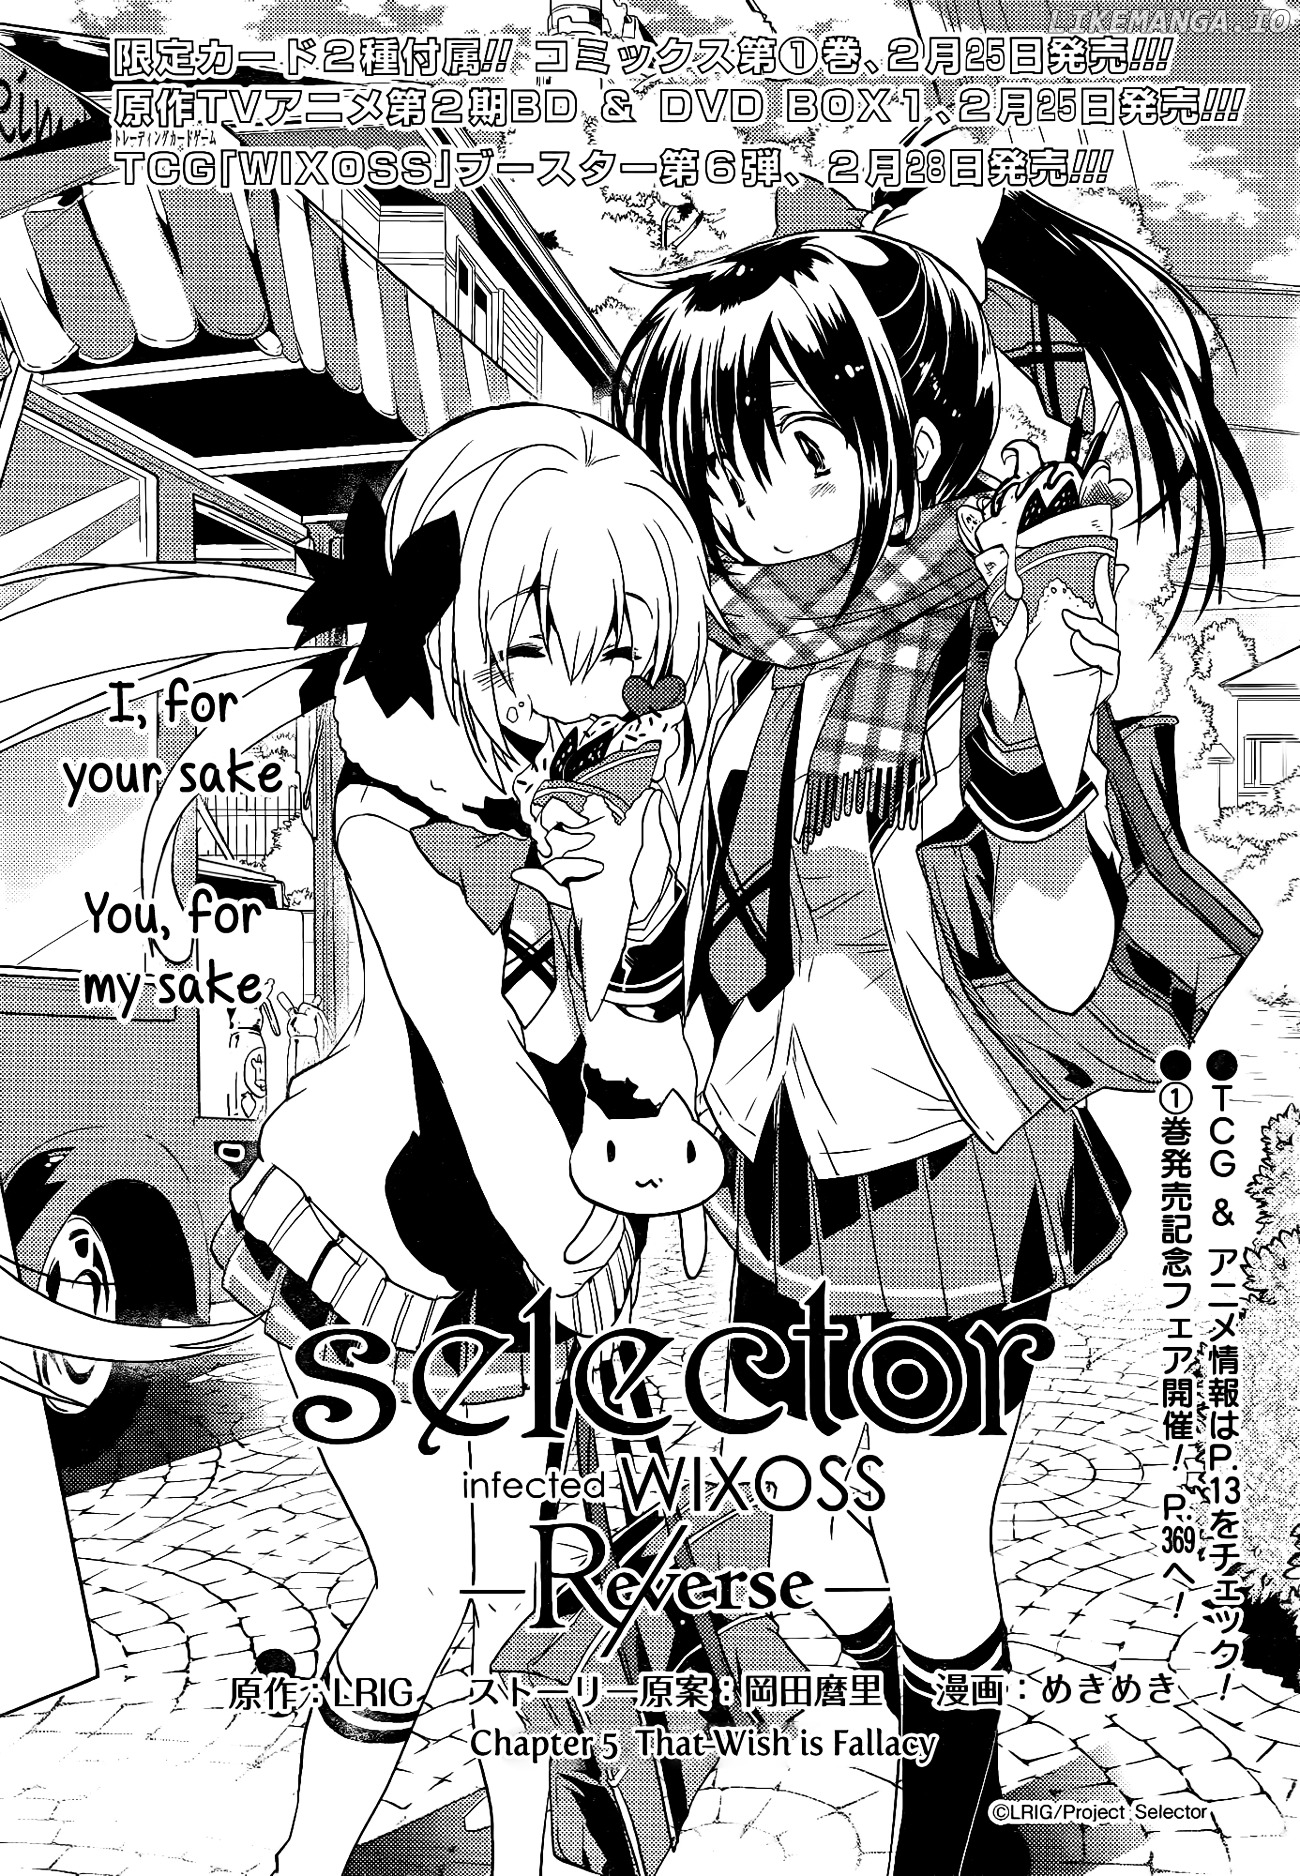 Selector Infected WIXOSS - Re/verse chapter 5 - page 1